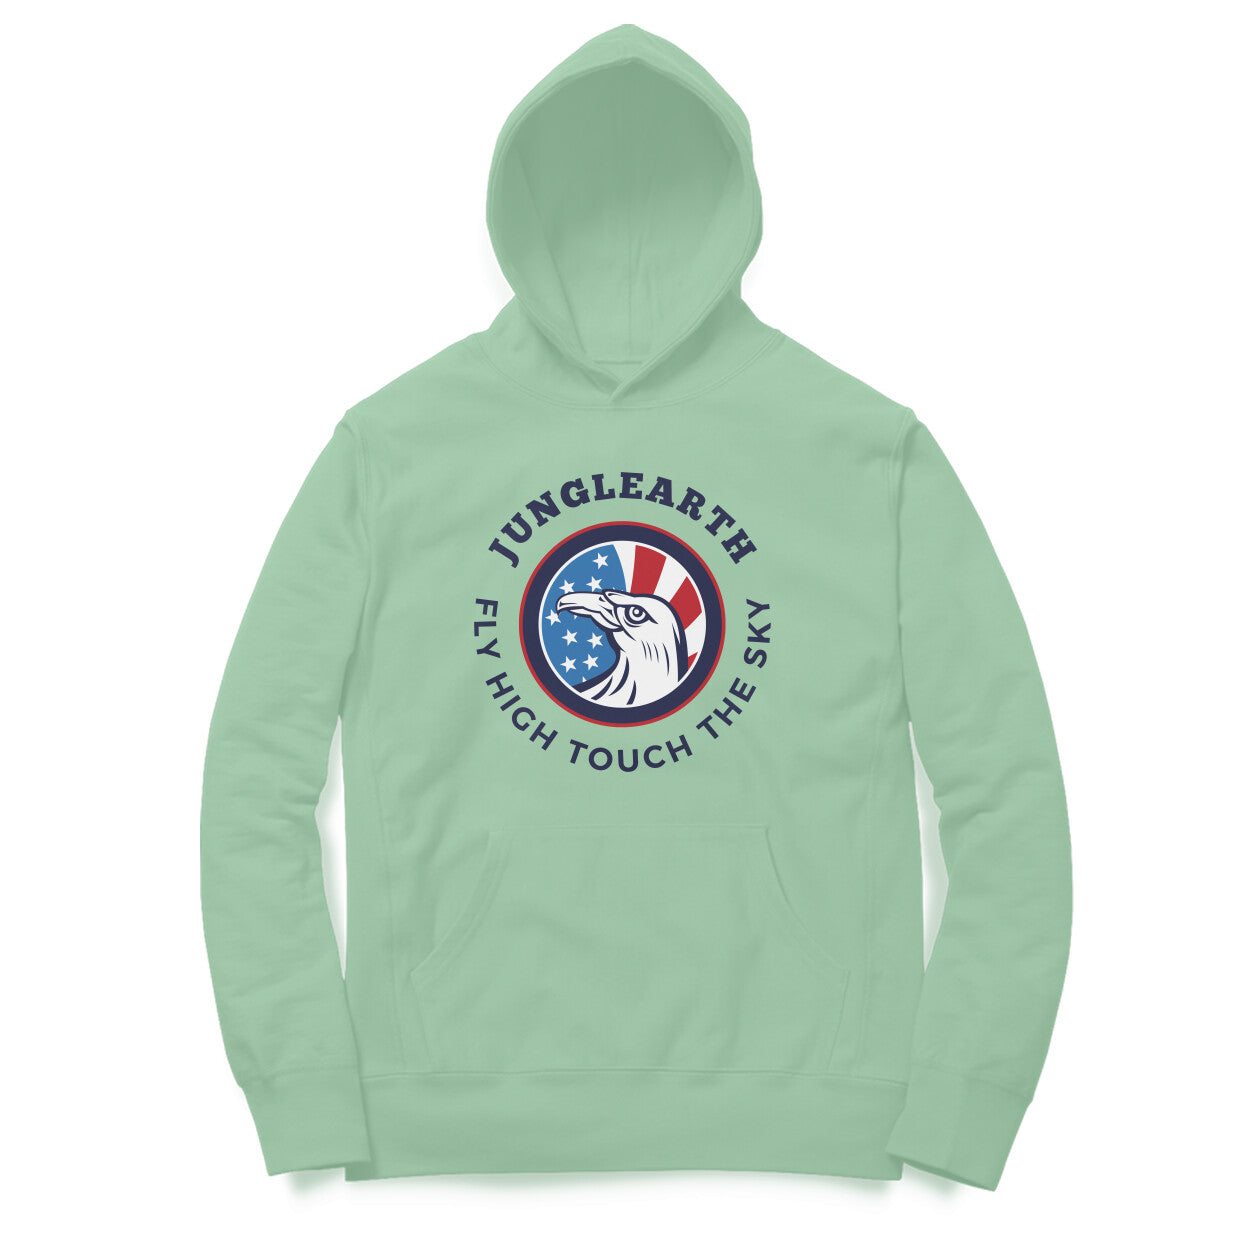 JUNGLEARTH Touch the sky Unisex Hoodies